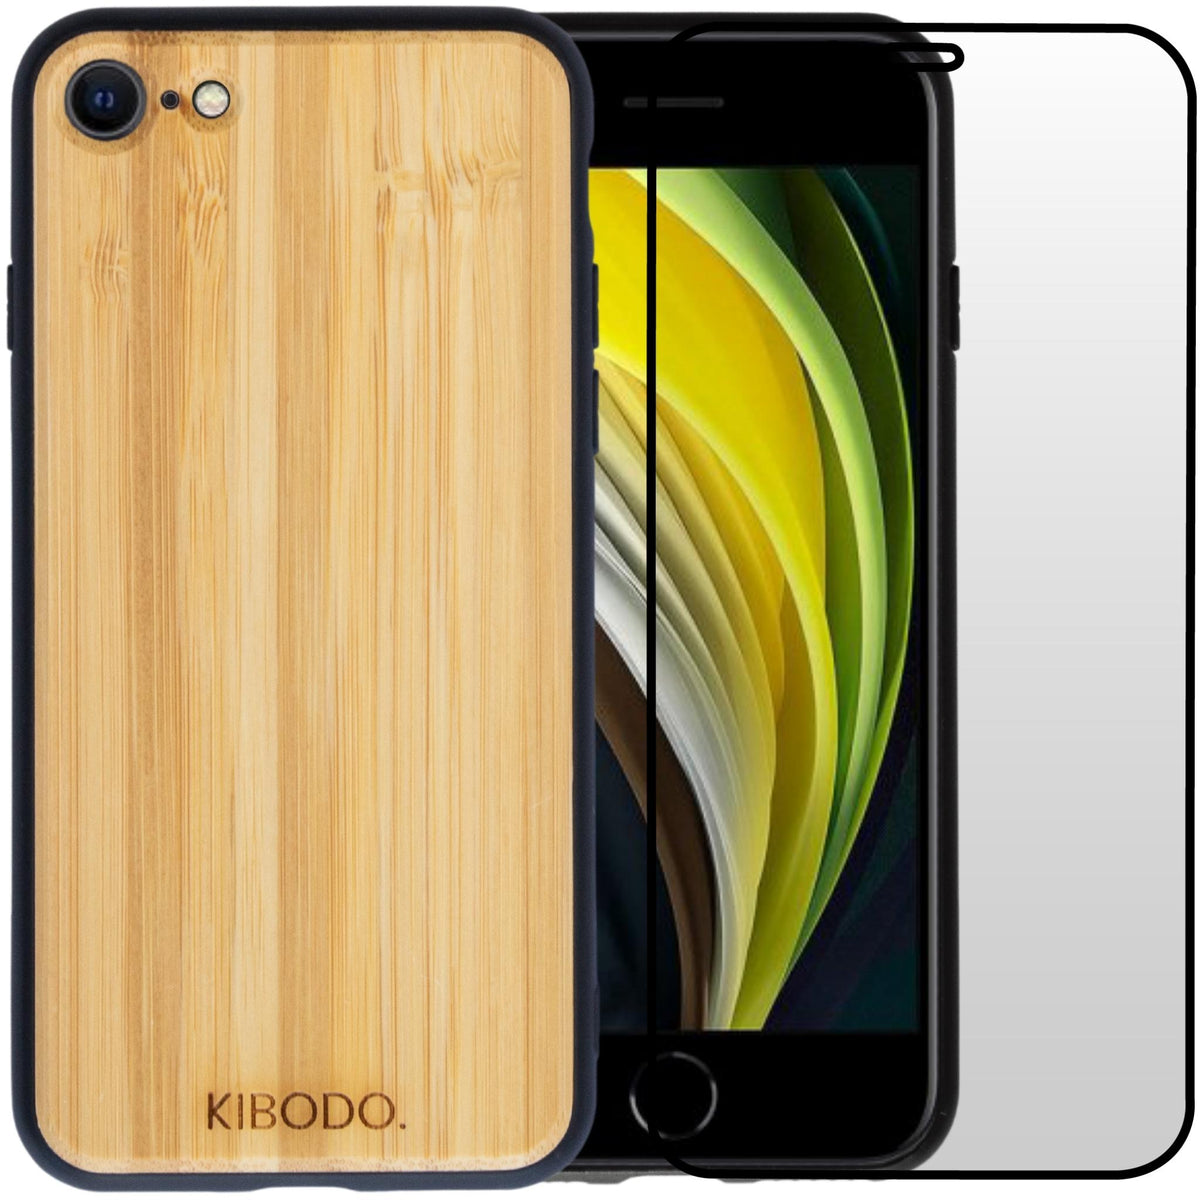 Wooden iPhone 8 Case + Screen Protector